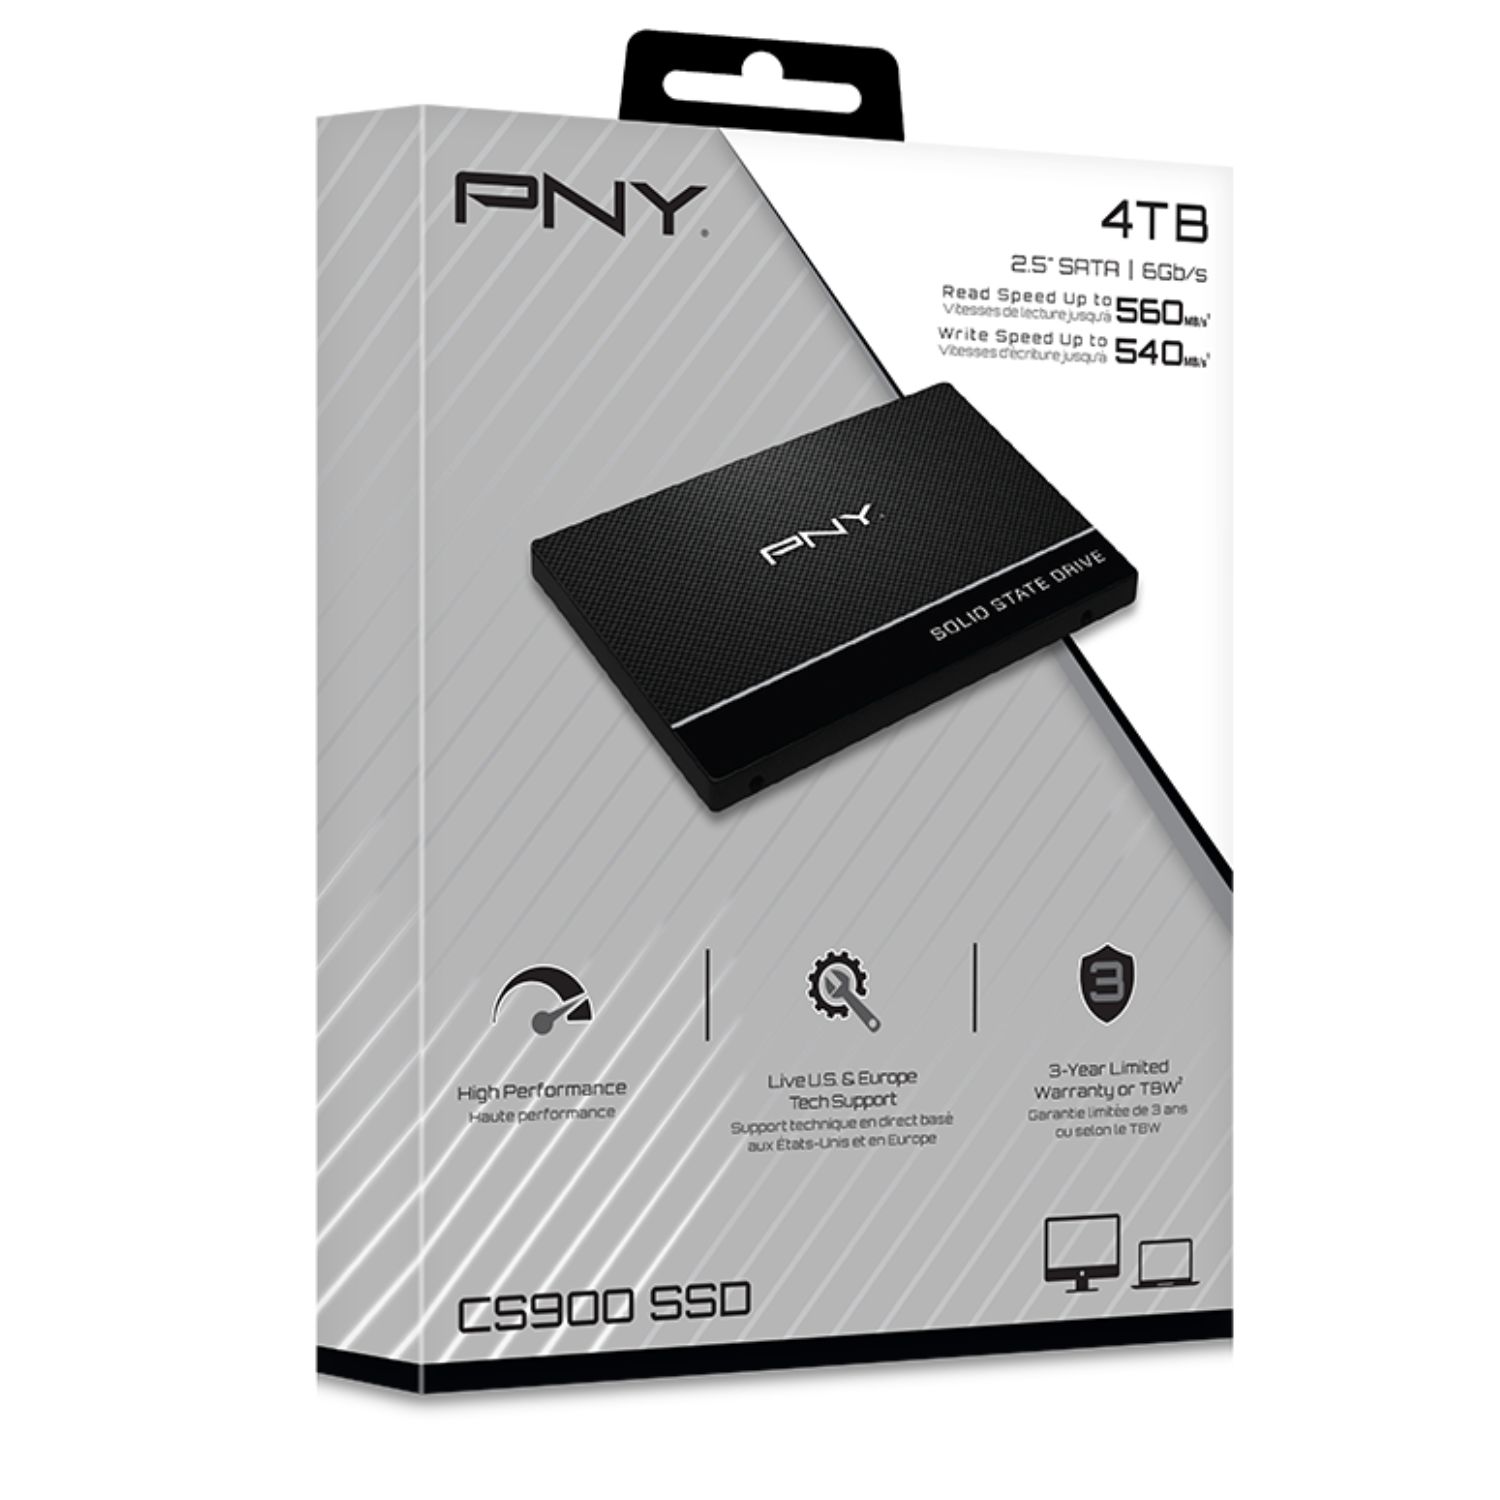 PNY CS900 4TB 2.5” SATA III Internal Solid State Drive (SSD) – (SSD7CS900-4TB-RB)  Sequential Read of up to 560 MB/s and Write of up to 540 MB/s